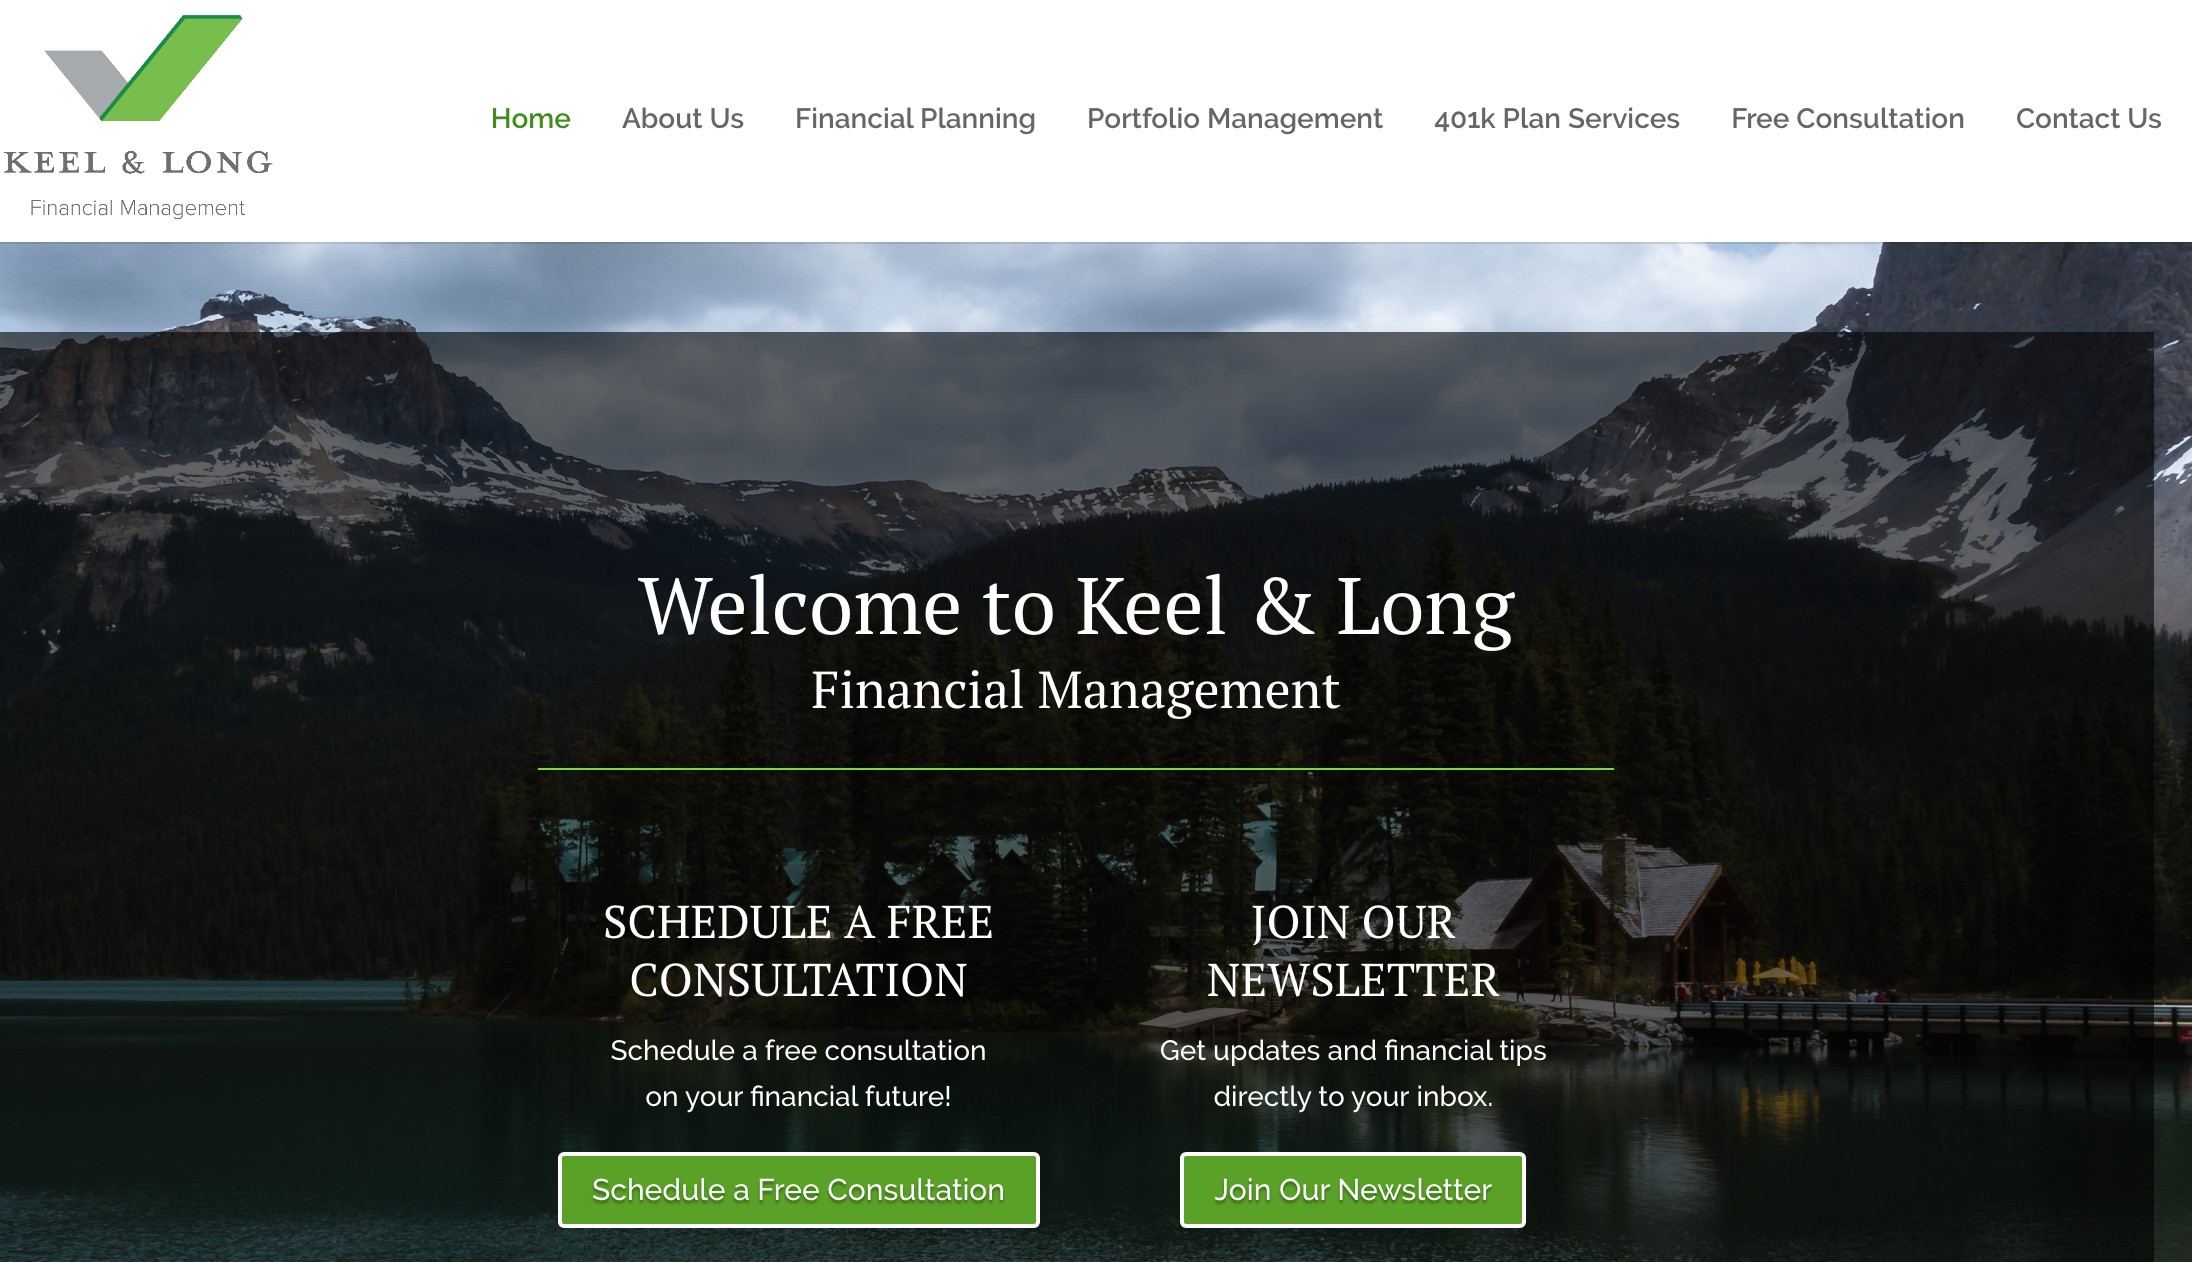 A screenshot of the Keel and Long Financial Management website, published to: "Web Design, WordPress, SEO, Writing, and Graphic Design for Keel and Long Financial Management"